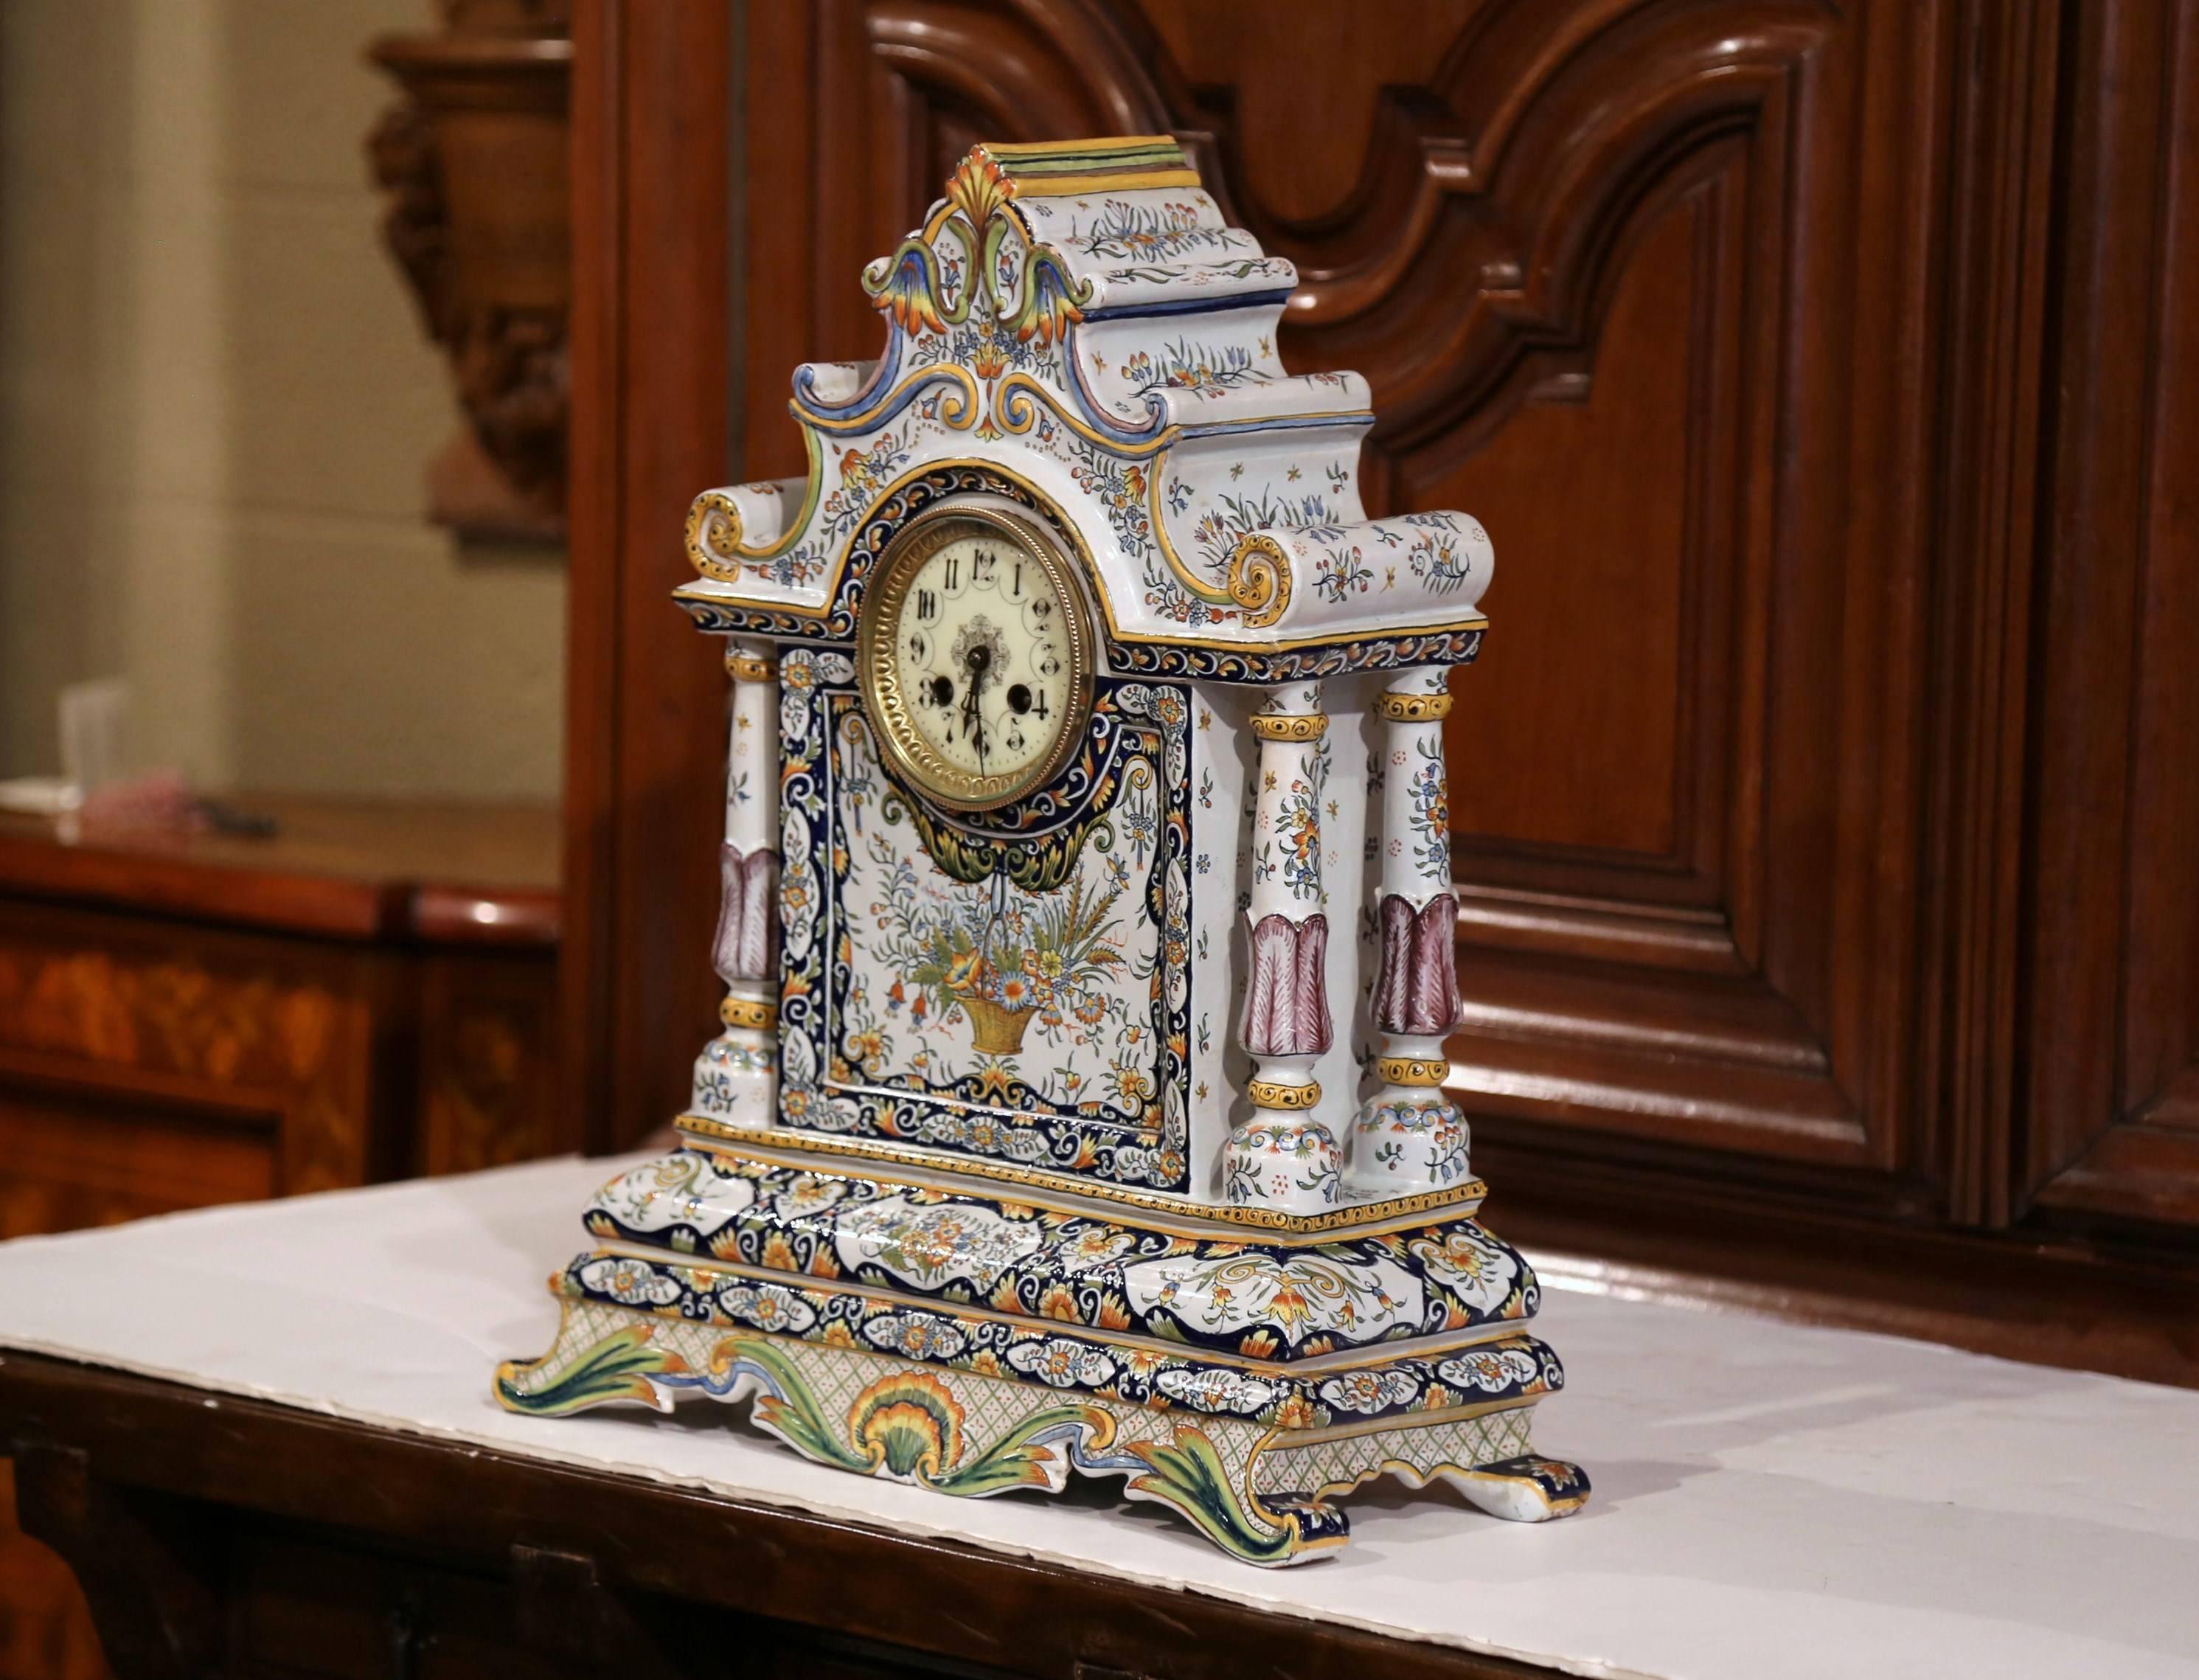 This elegant antique clock was crafted in Normandy, France, circa 1870. The colorful mantel clock sits on four curved feet with shell and leaf decor. The porcelain timepiece features an intricate top with curved shapes, a center enamel clock face,